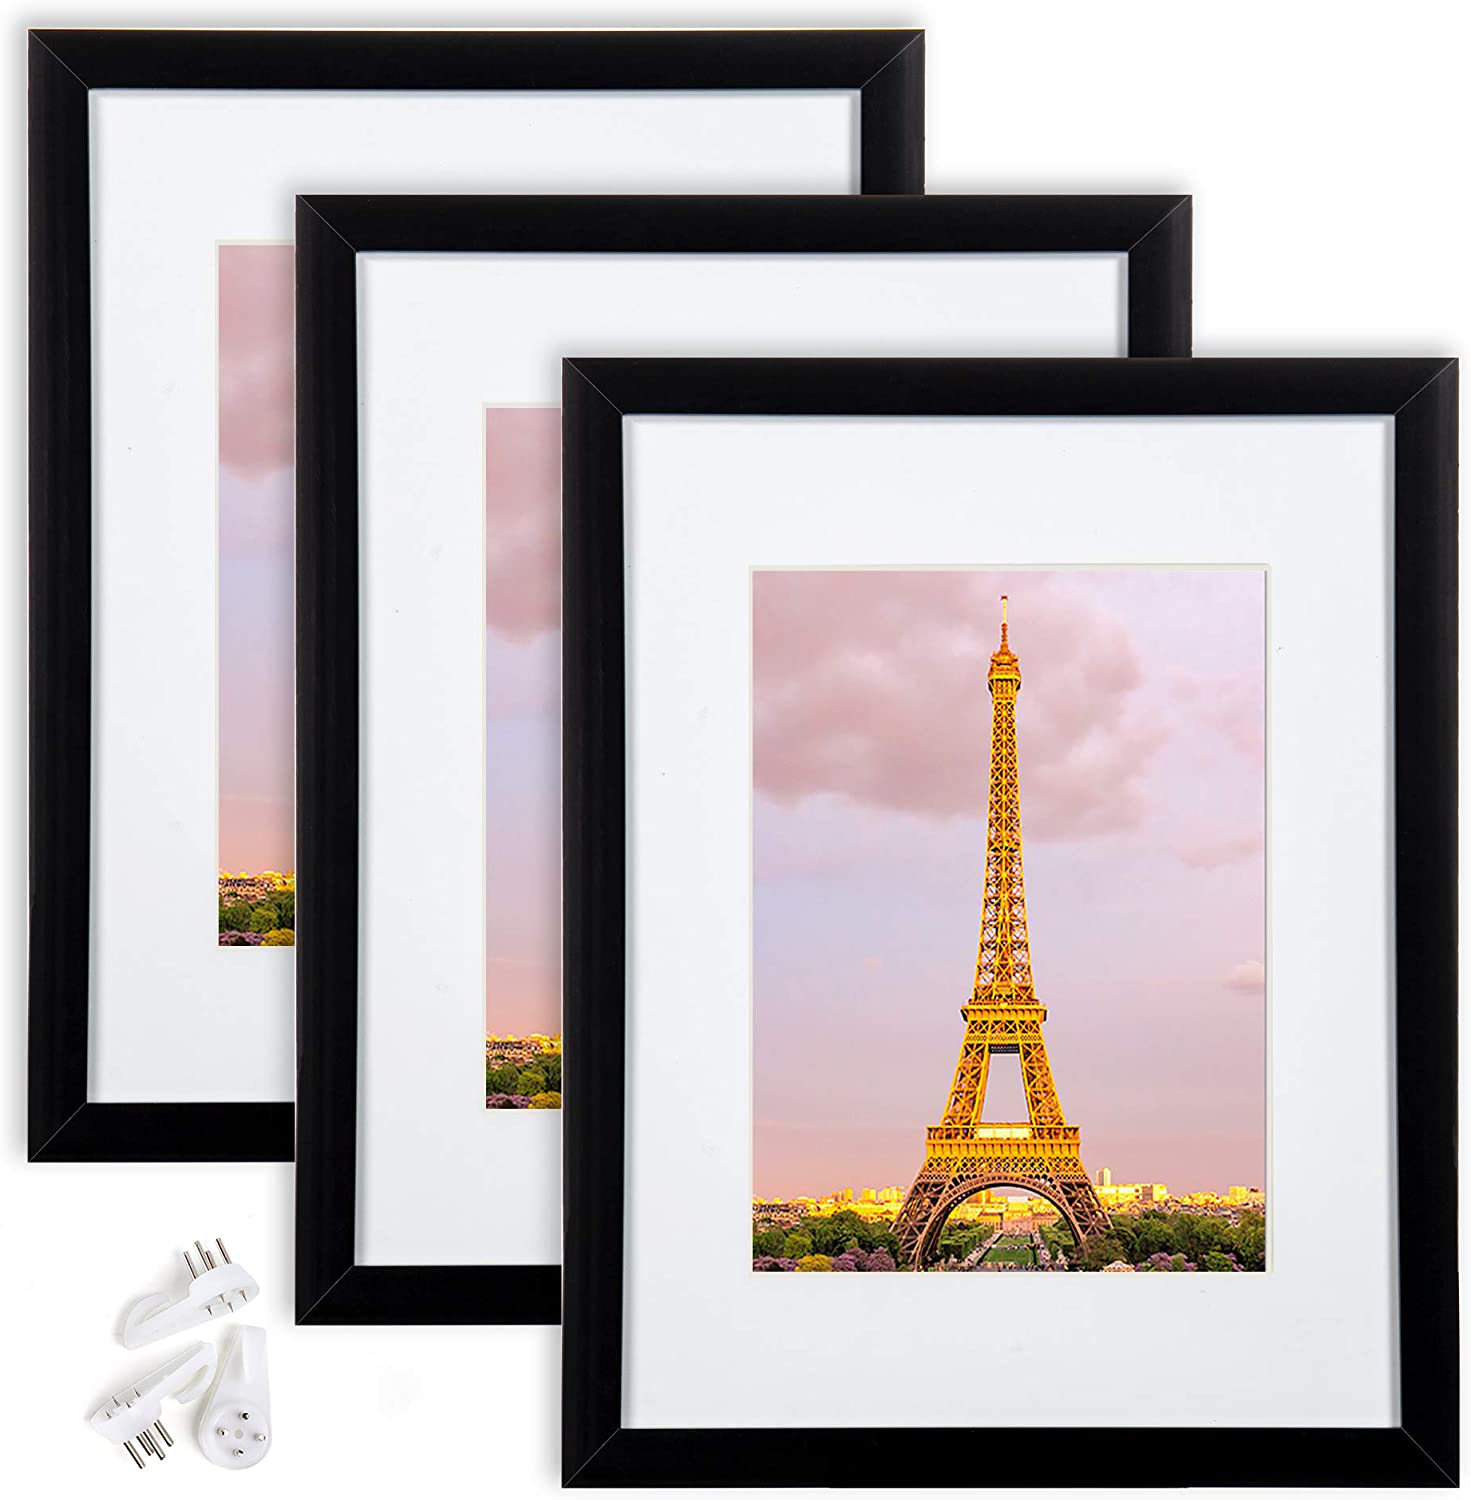 upsimples 8x10 Picture Frame Set of 3,Made of High Definition Glass for 5x7 with Mat or 8x10 Without Mat,Wall Mounting Photo Frame Vintage Black